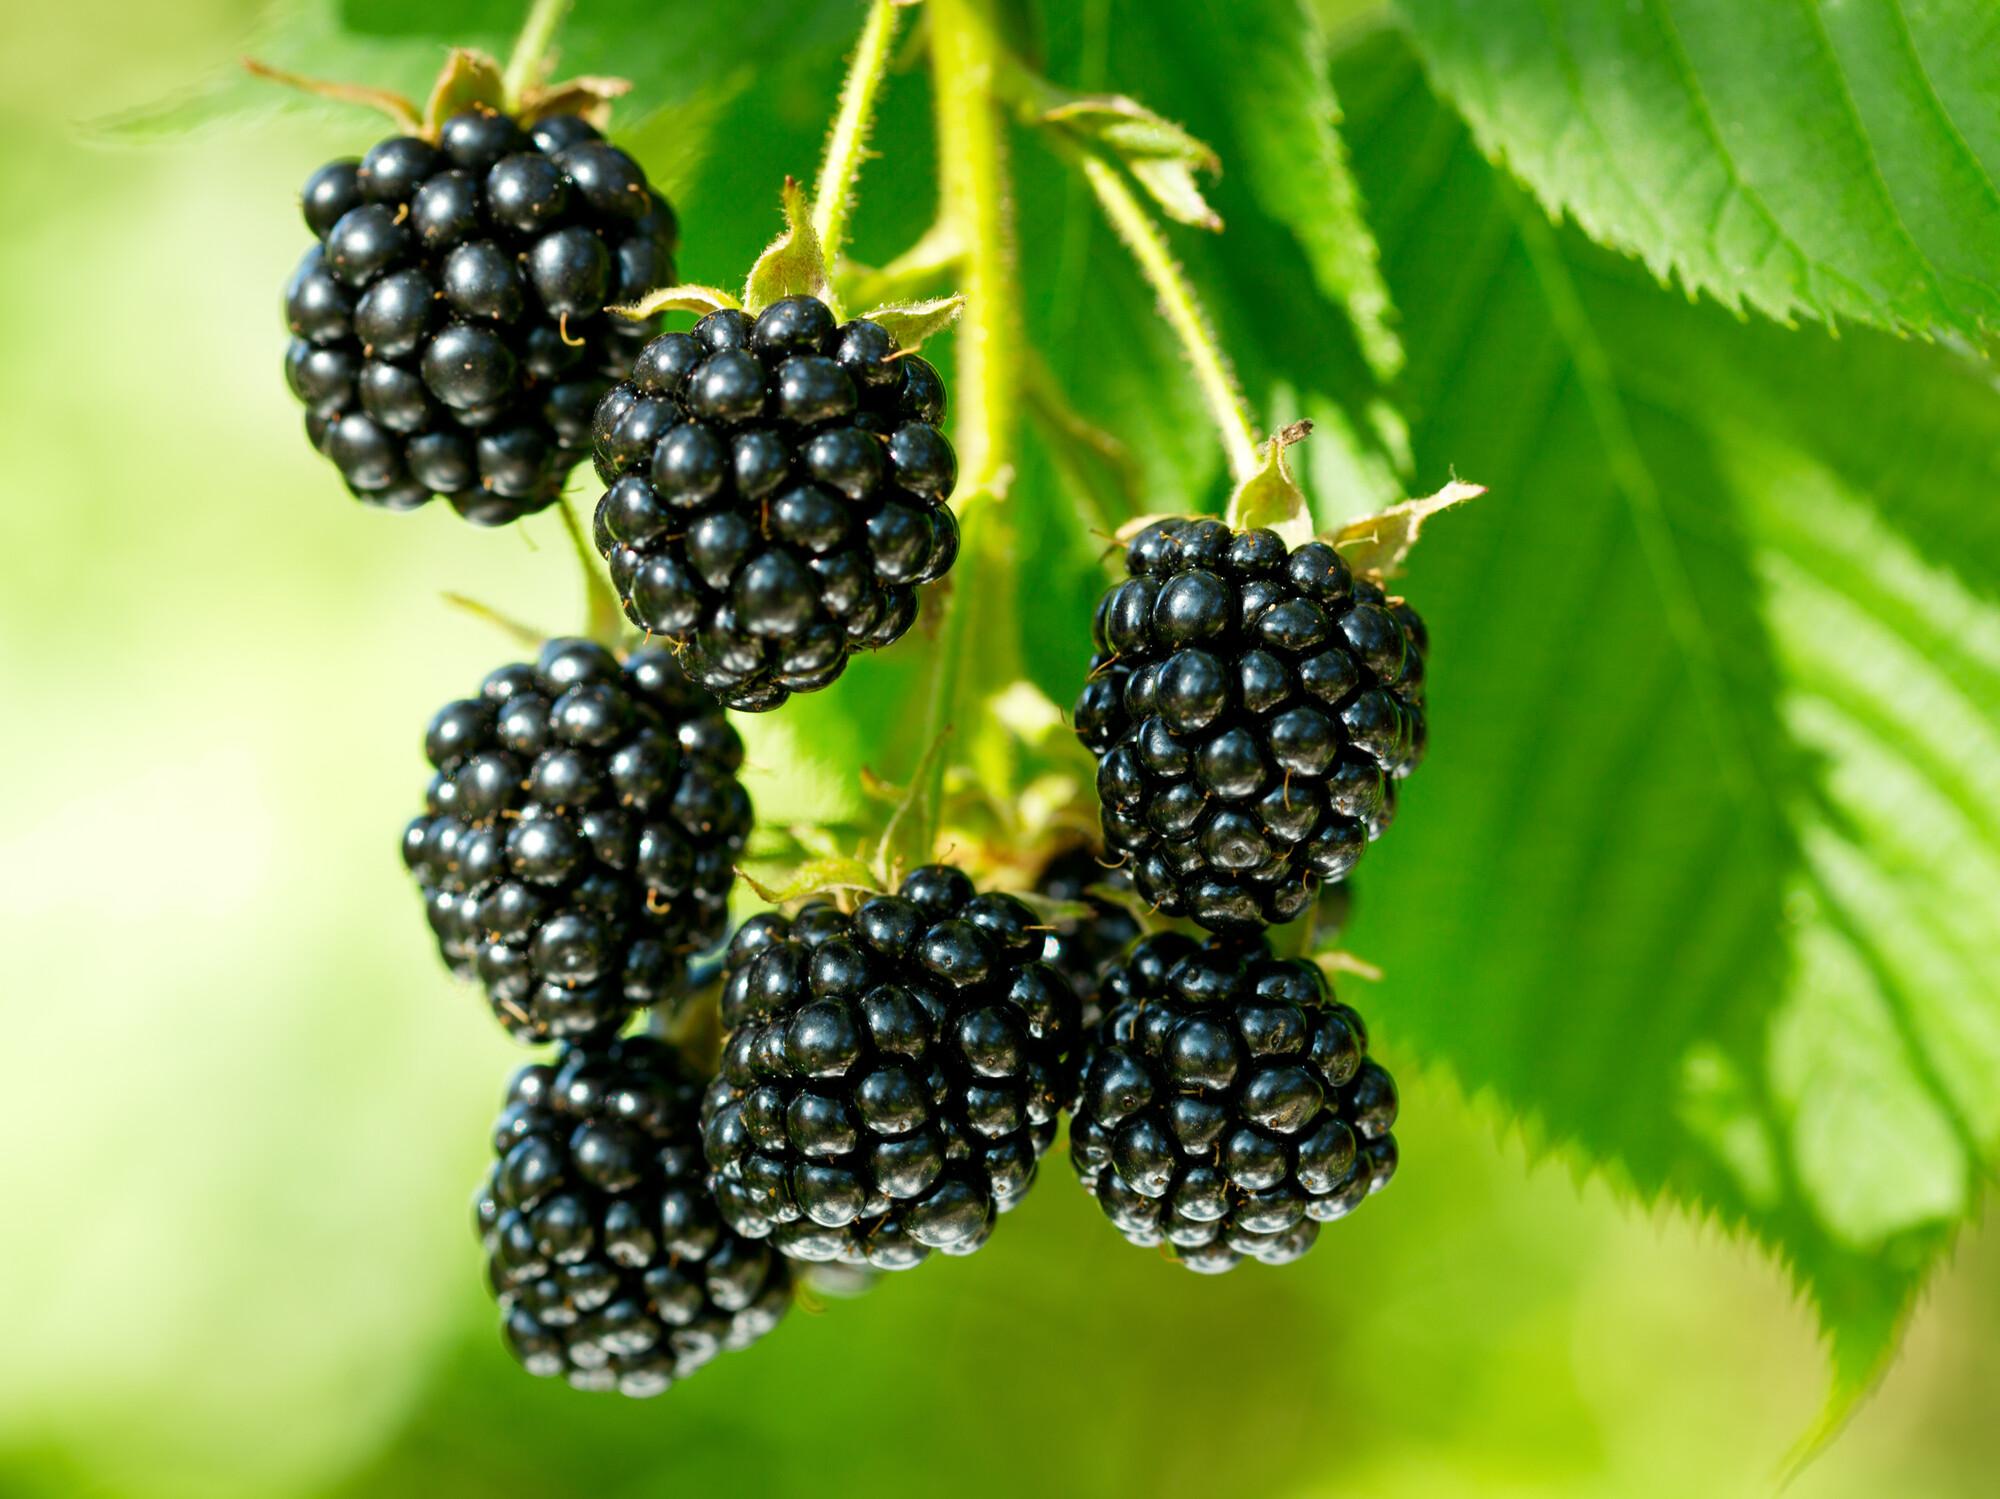 A cluster of blackberries hanging from a branch with green leaves